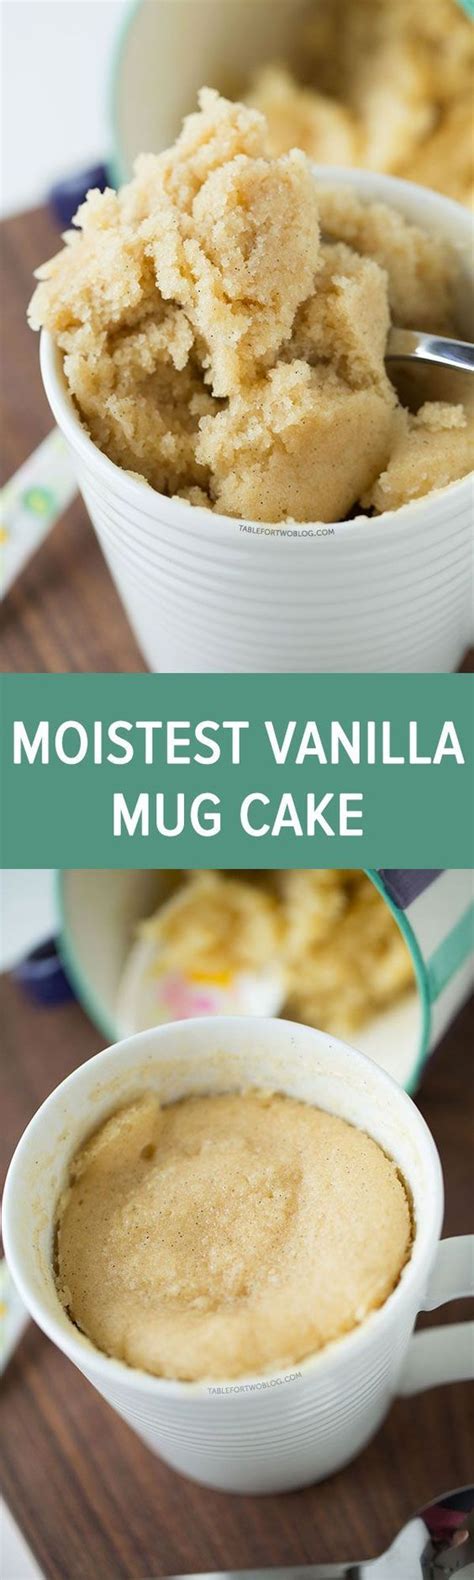 Try this out instead of making an entire cake to easily and quickly satisfy your sweet tooth. The moistest very vanilla mug cake is like a fluffy ...